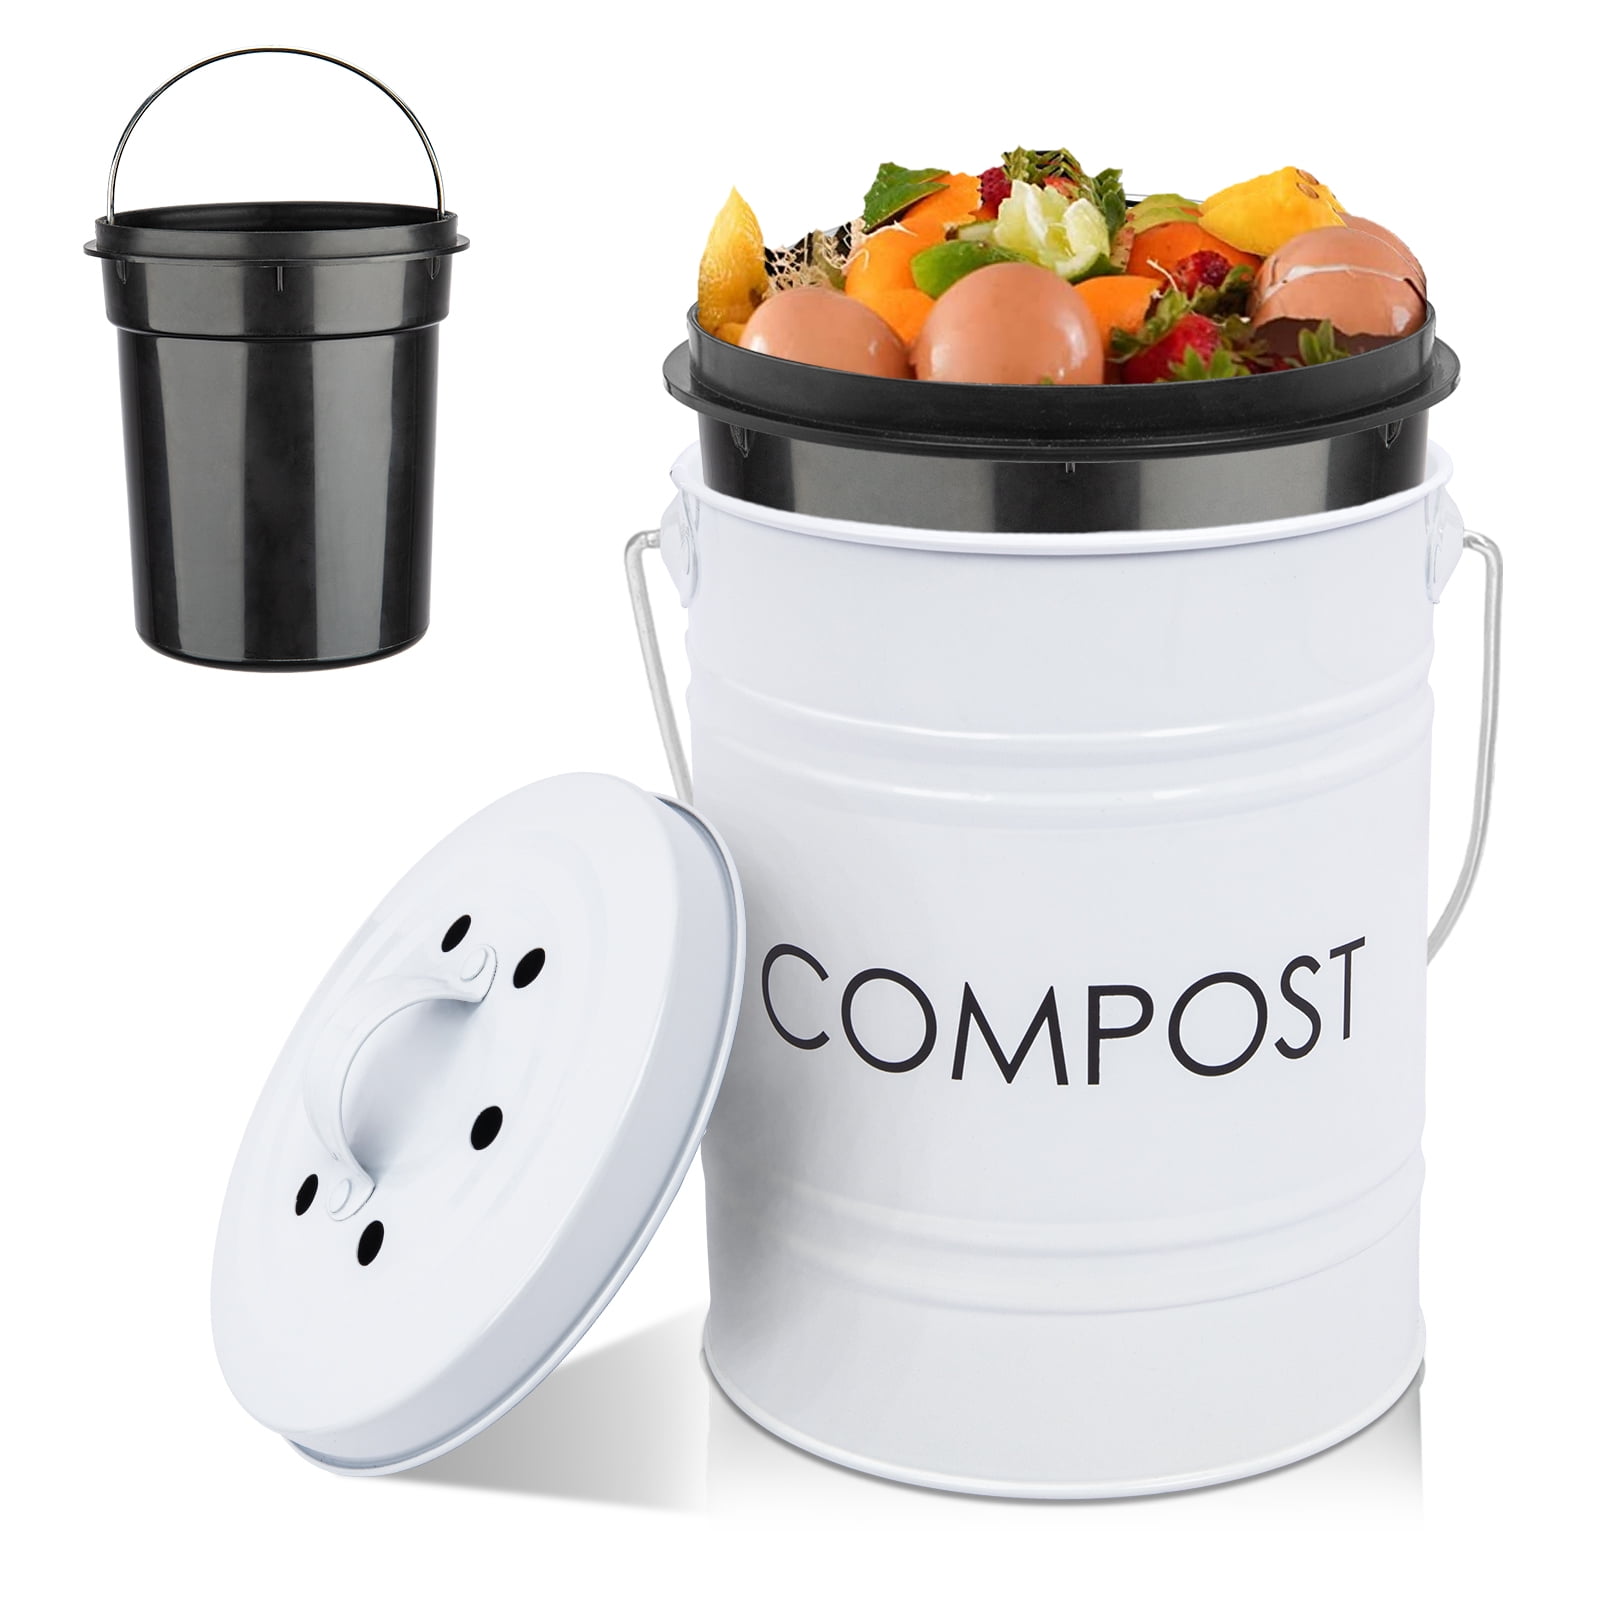 Vipush Compost Bin Kitchen Countertop Compost Bin with lid, Small Compost  Bin Includes Inner Compost Bucket Liner & Charcoal Filter, White